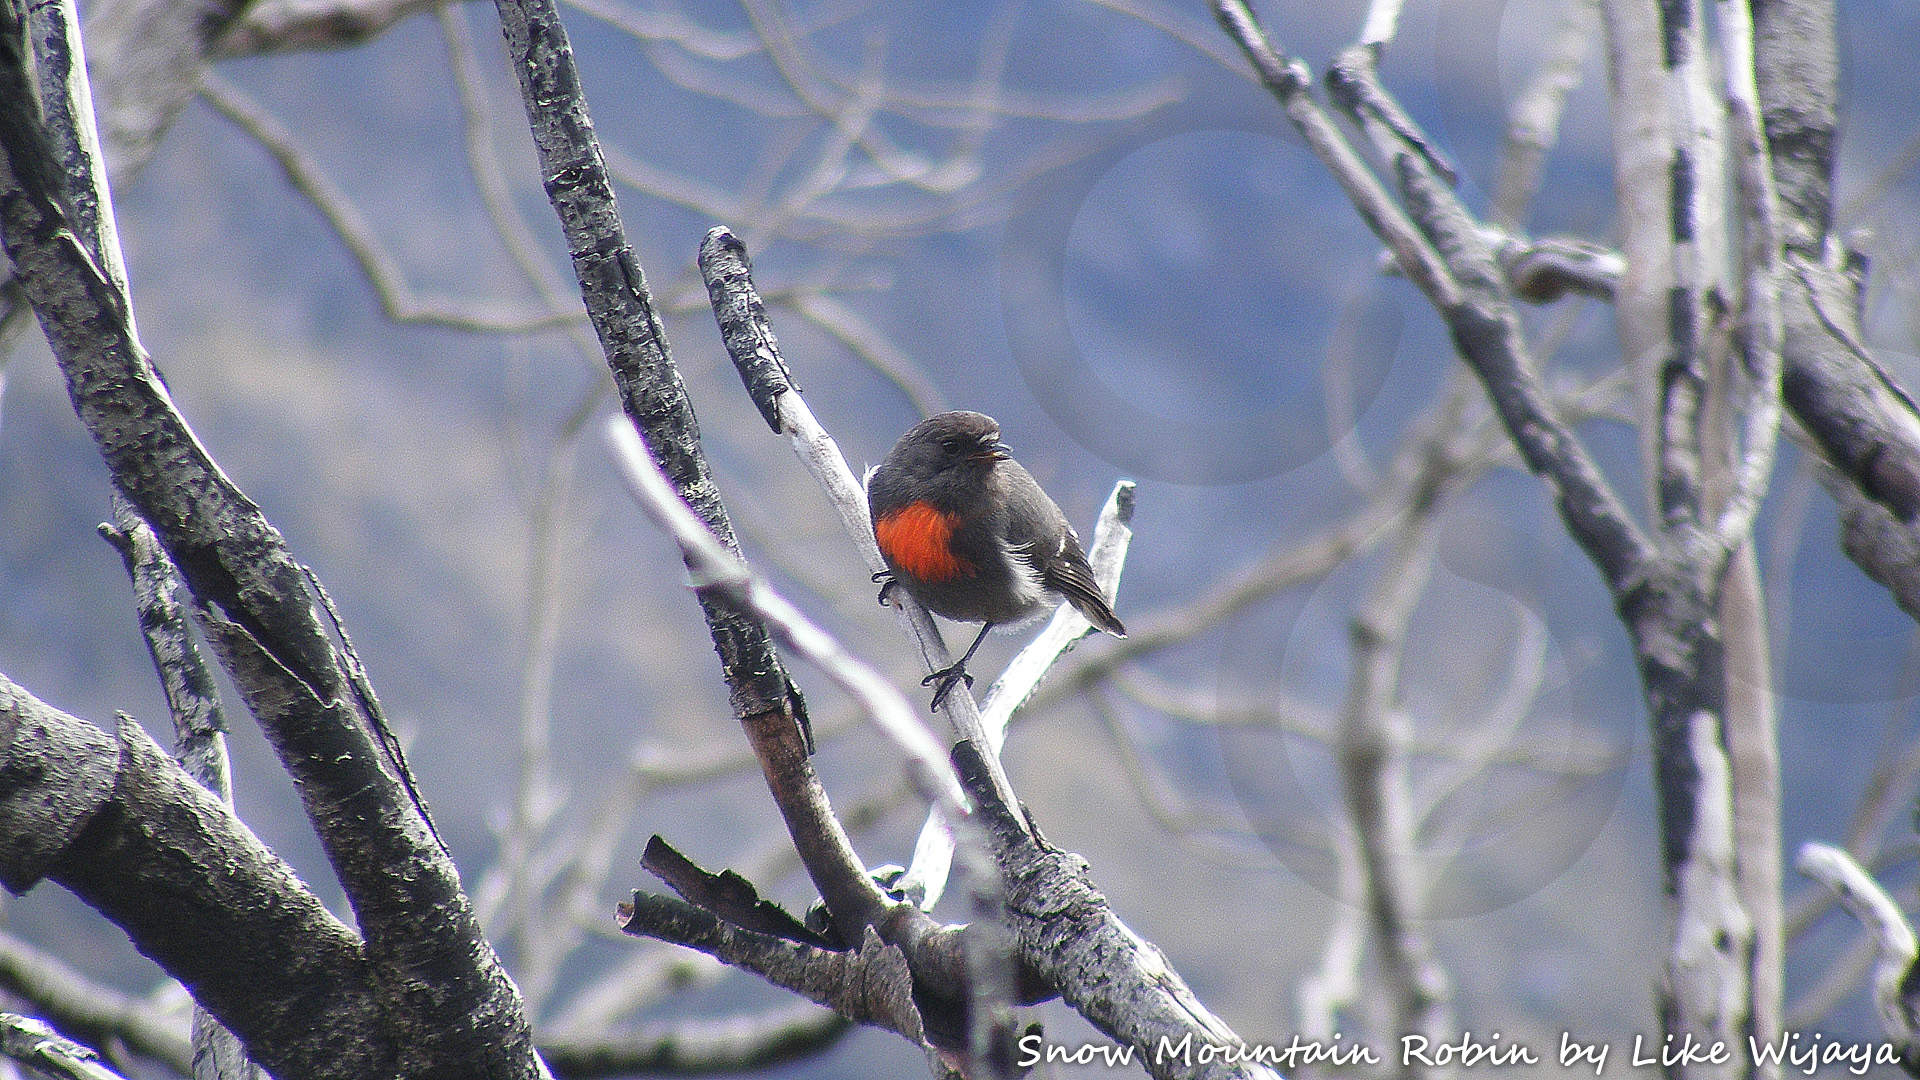 Snow Mountain Robin Petroica archboldi is one of five bird species that occur only in the Snow Mountains of West Papua or Indonesian New Guinea and nowhere else on Earth. This little gem appears to be genuinely confined to Peak Trikora or Wilhelmina and Peak Jaya or Carstenz, reliably setting in above 4,000 m elevation only. Copyright © Like Wijaya